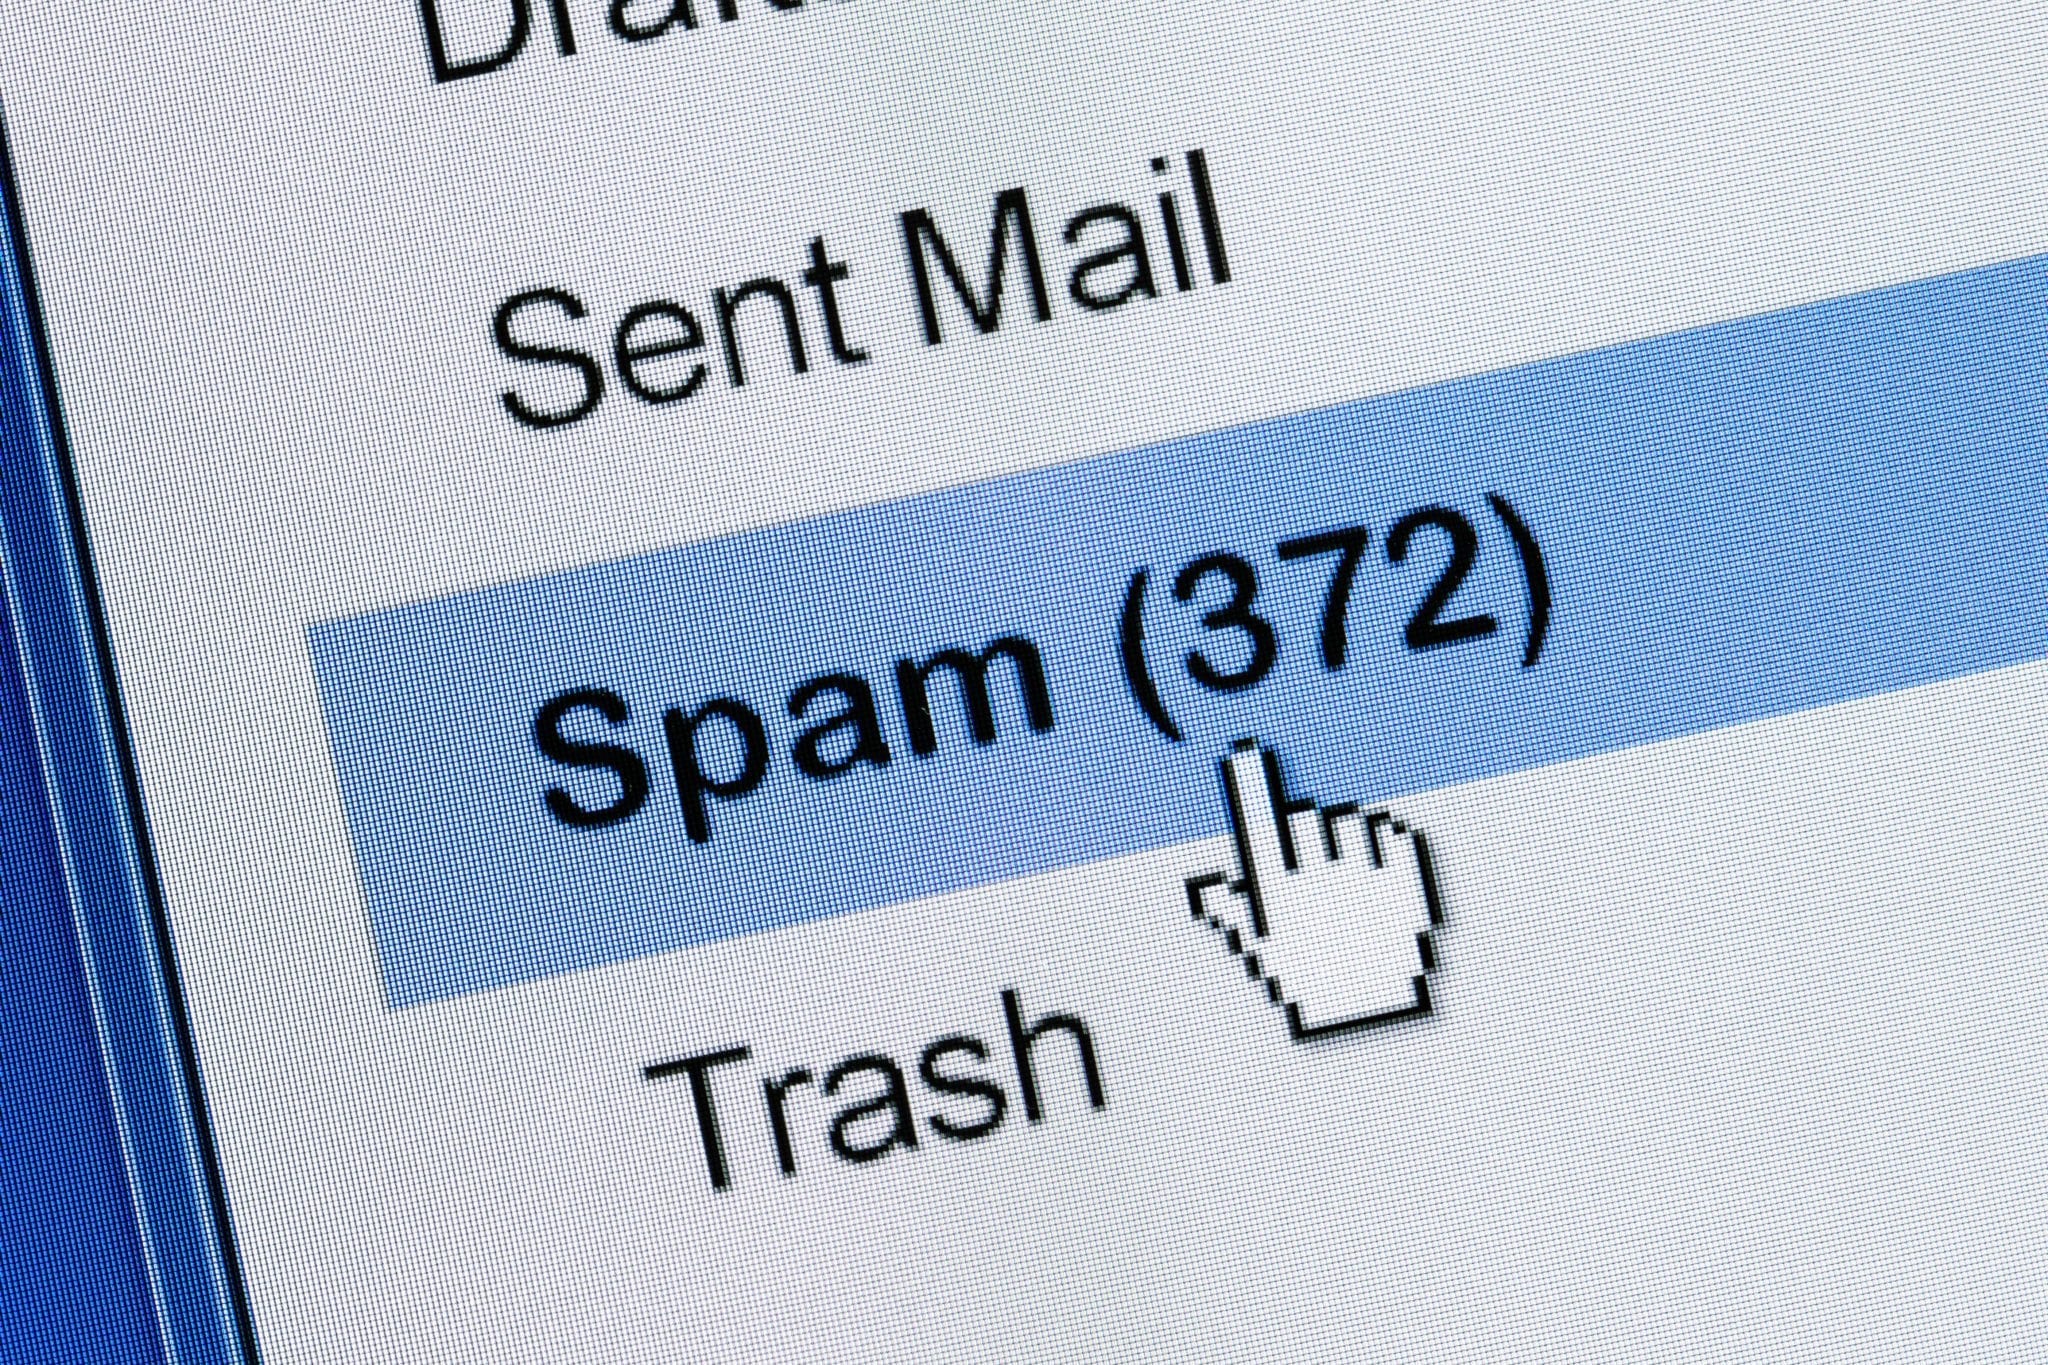 our-favourite-spam-bot-prevention-modules-for-drupal-7.jpg